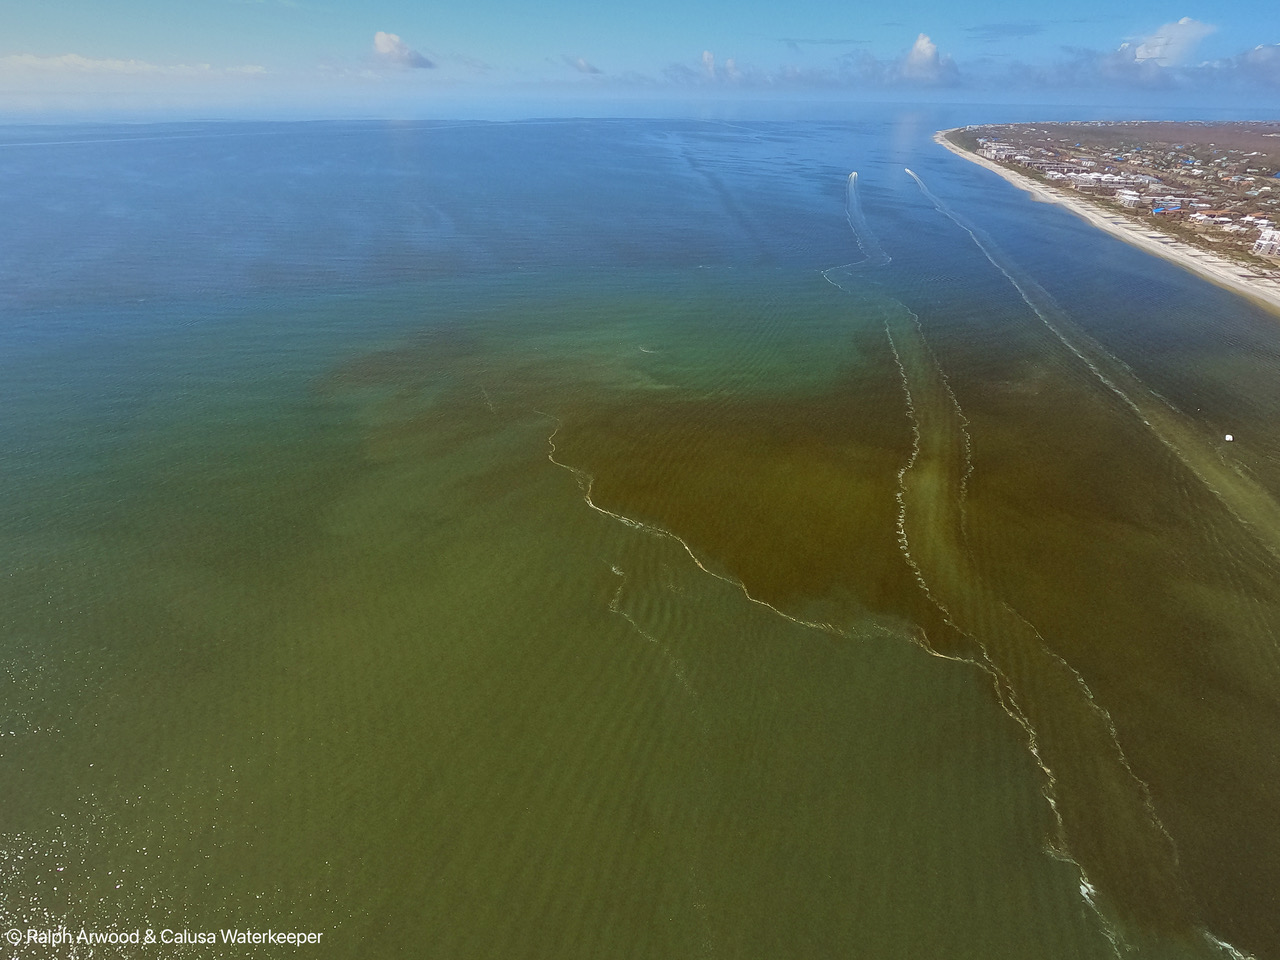 Aerial view of apparent red tide and other phytoplankton species in the water near Naples and Sanibel, Florida on 13 November 2022. According to the Florida Fish and Wildlife Conservation Commission, beaches from Sarasota to Port Charlotte varied between low, medium, and high levels of red tide. Because Hurricane Ian brought so much rain to Florida in September, scientists on the coast closely monitored water quality to see if the storm had any impacts. Photo: Ralph Arwood / Calusa Waterkeeper